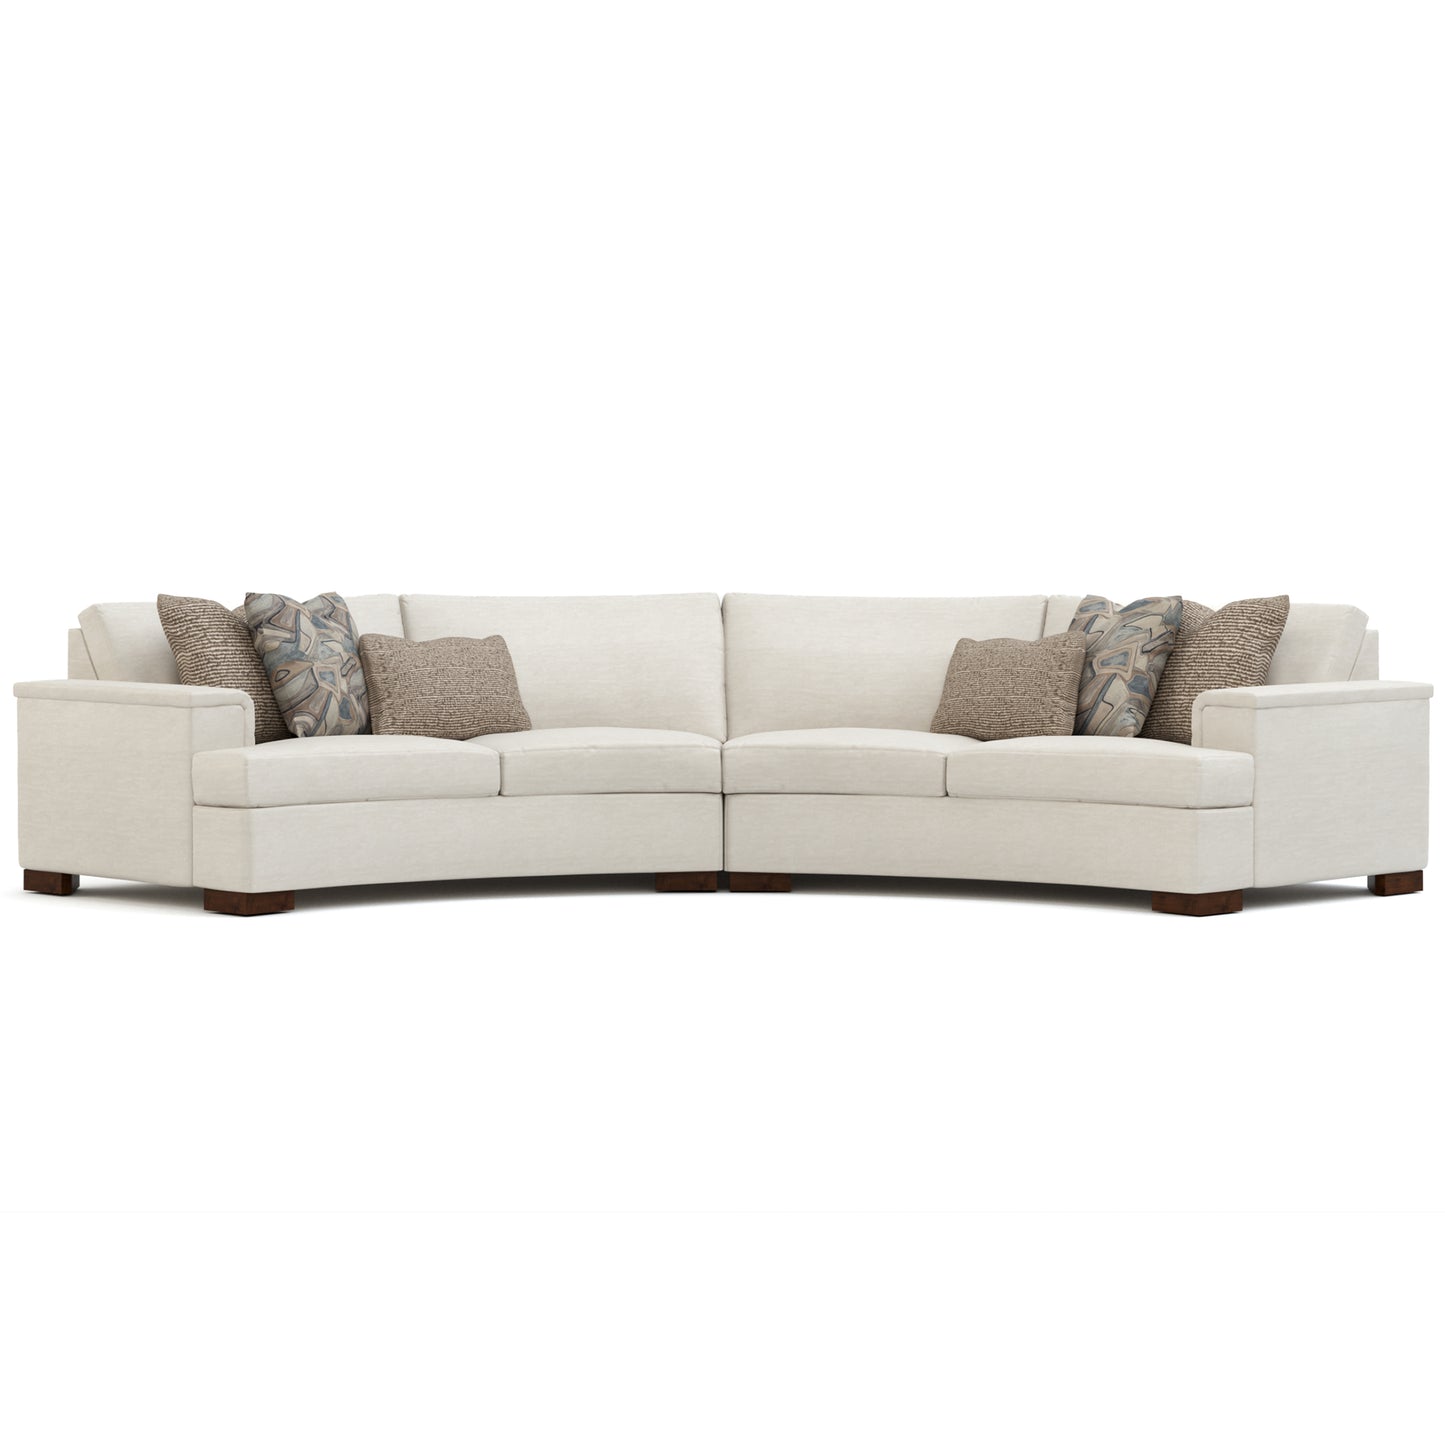 Hayward Small Curved Sectional